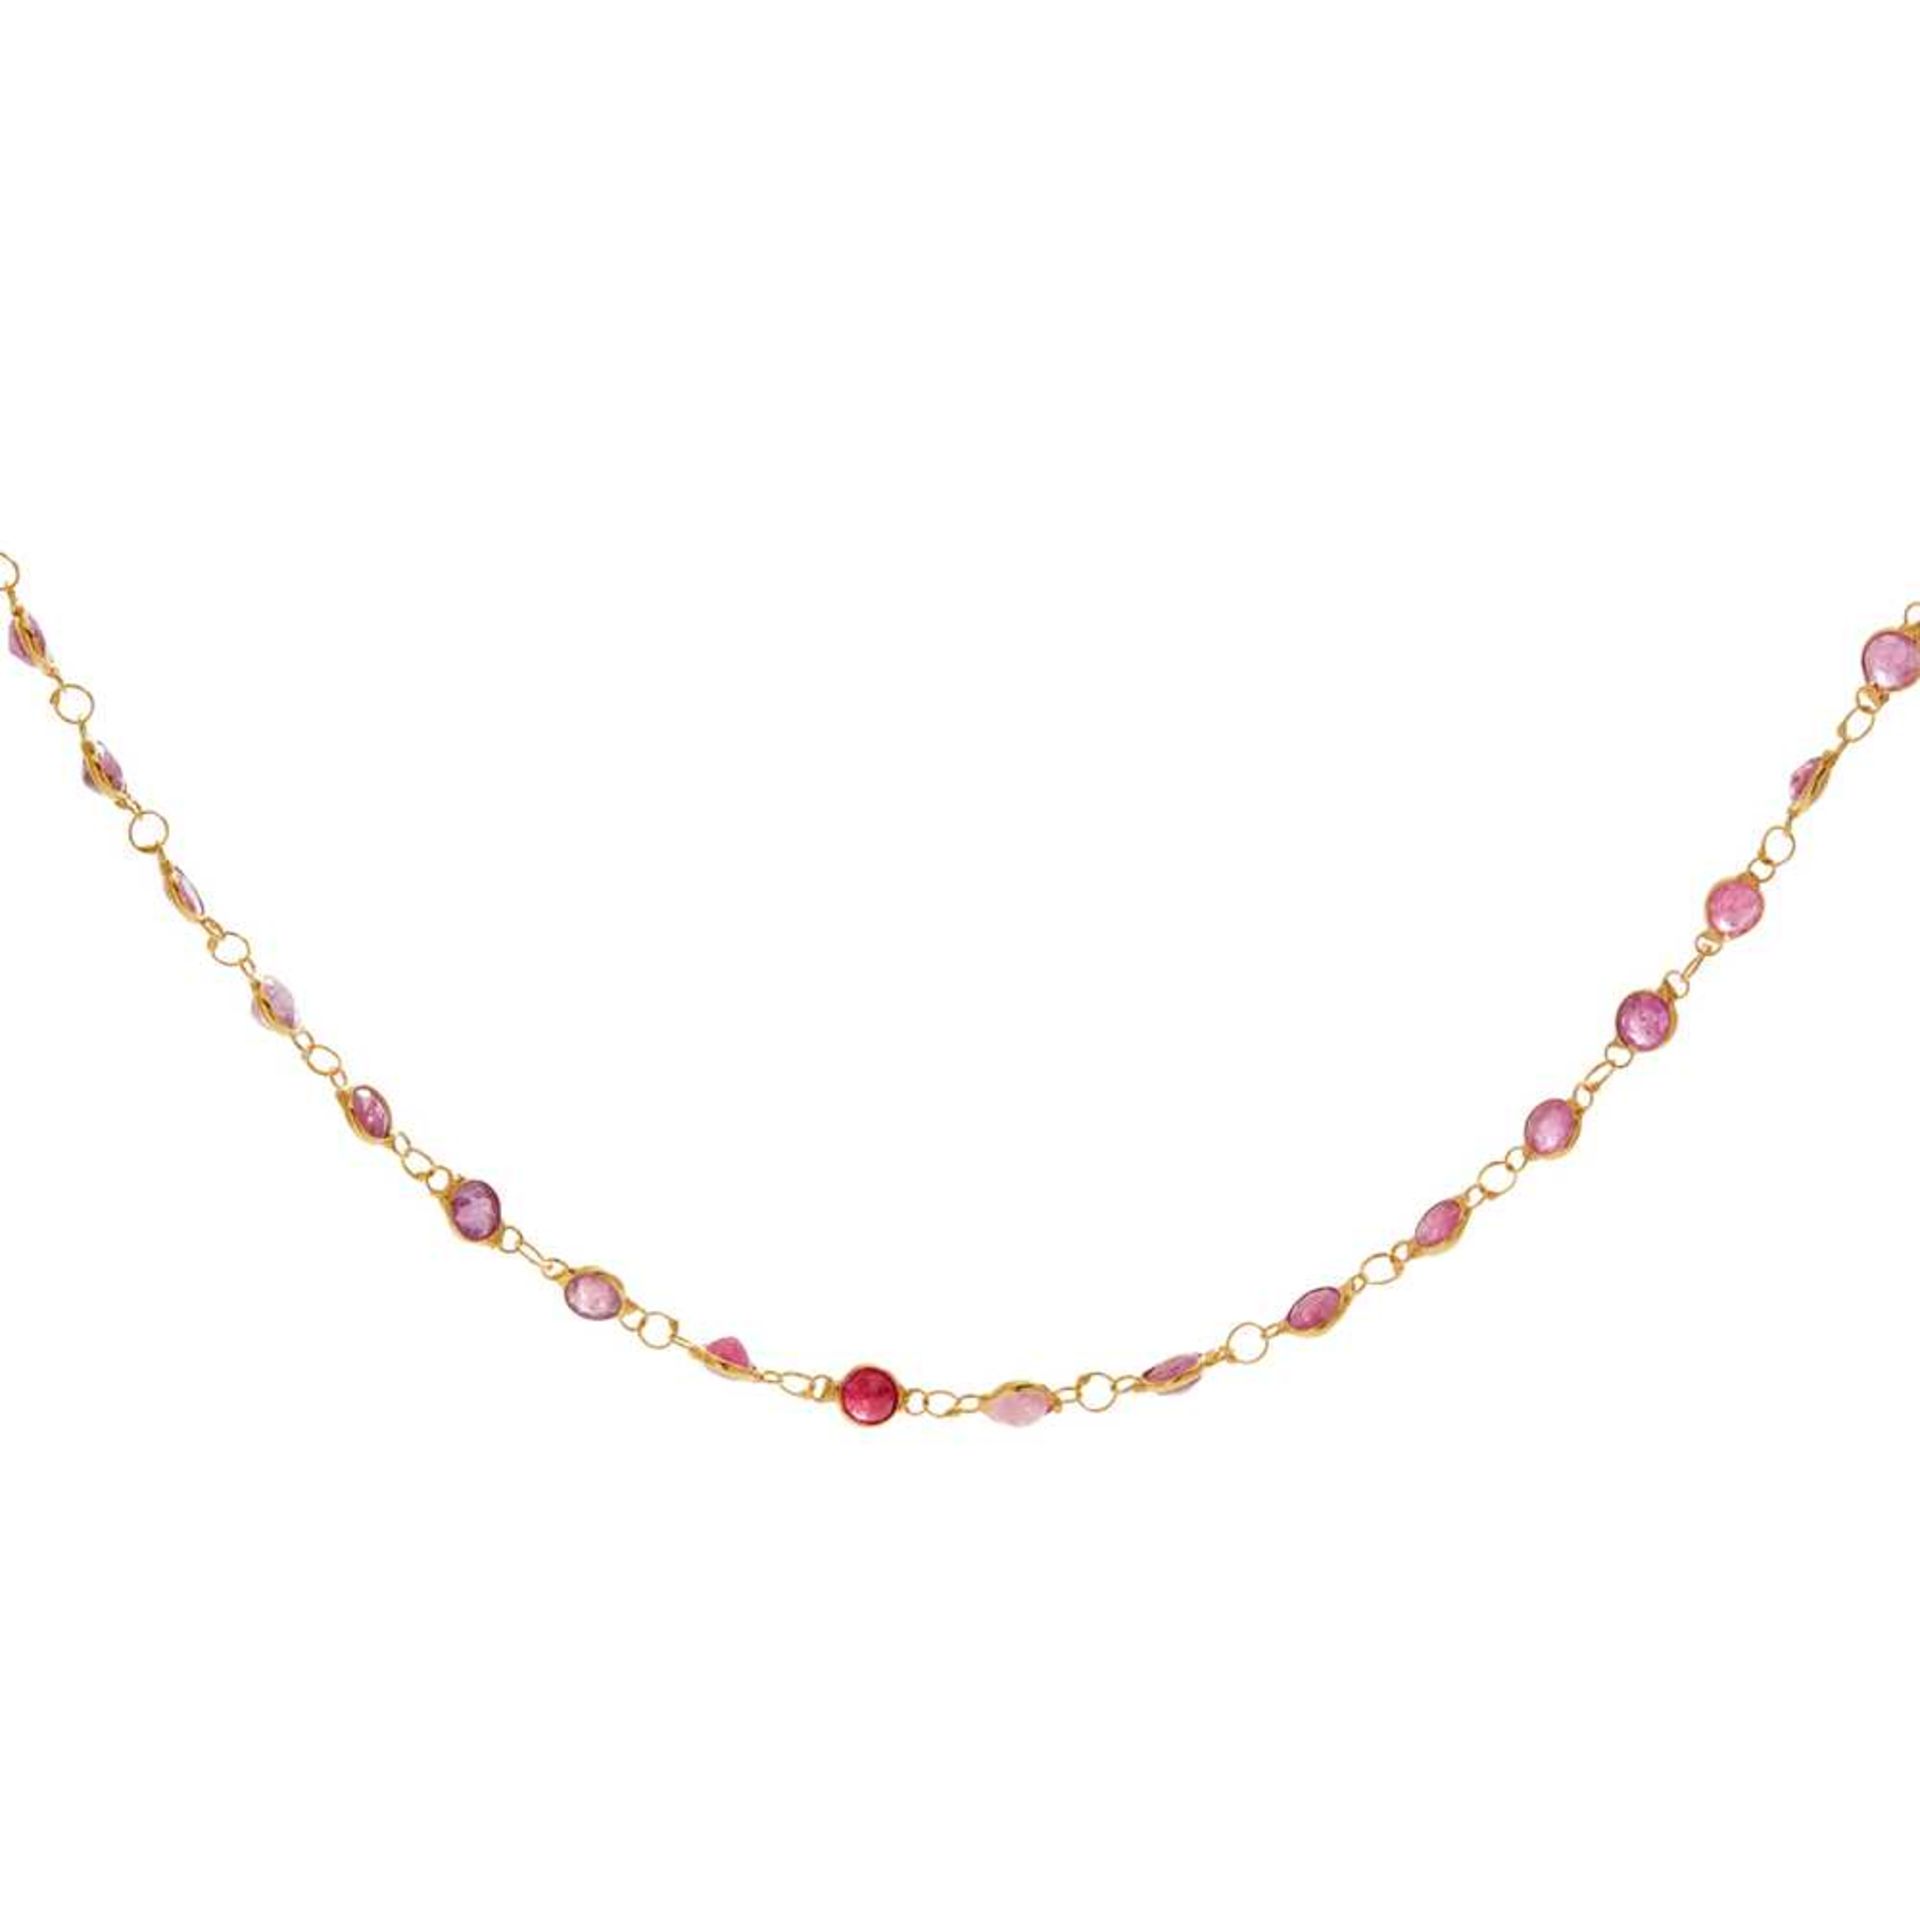 A ruby necklace